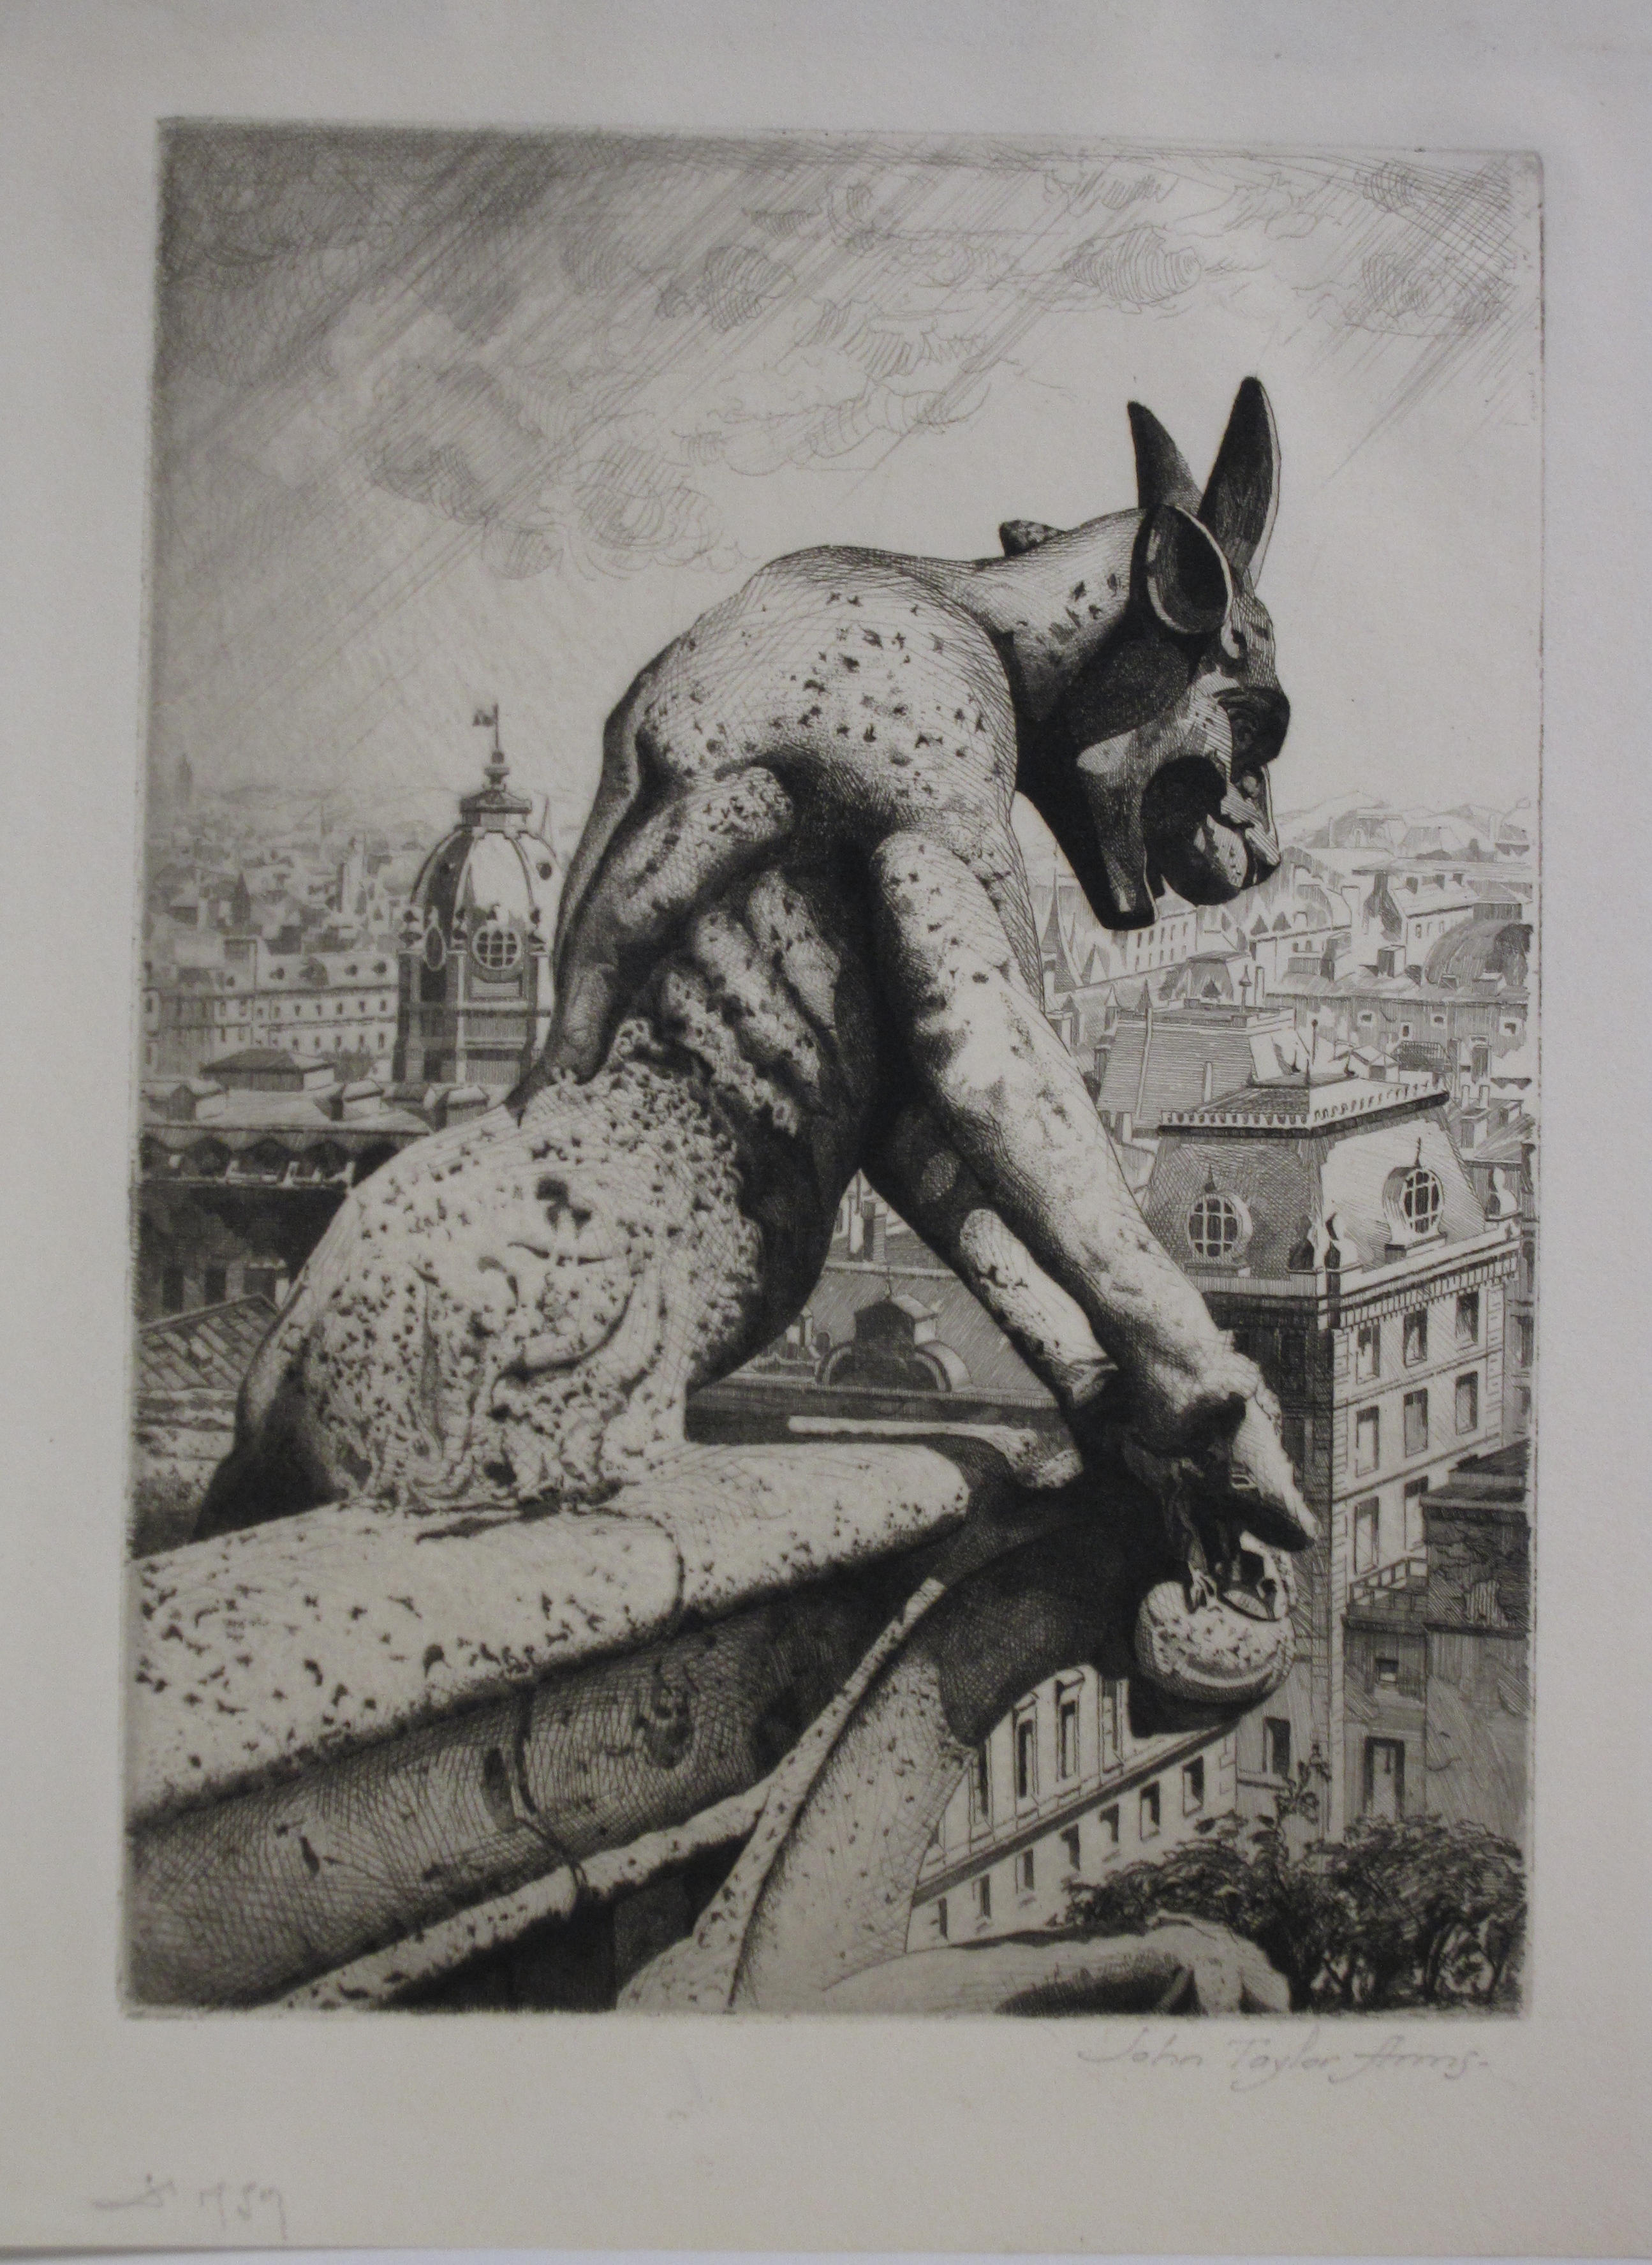 "The Gargoyle and His Quarry, Notre Dame" by John Taylor Arms